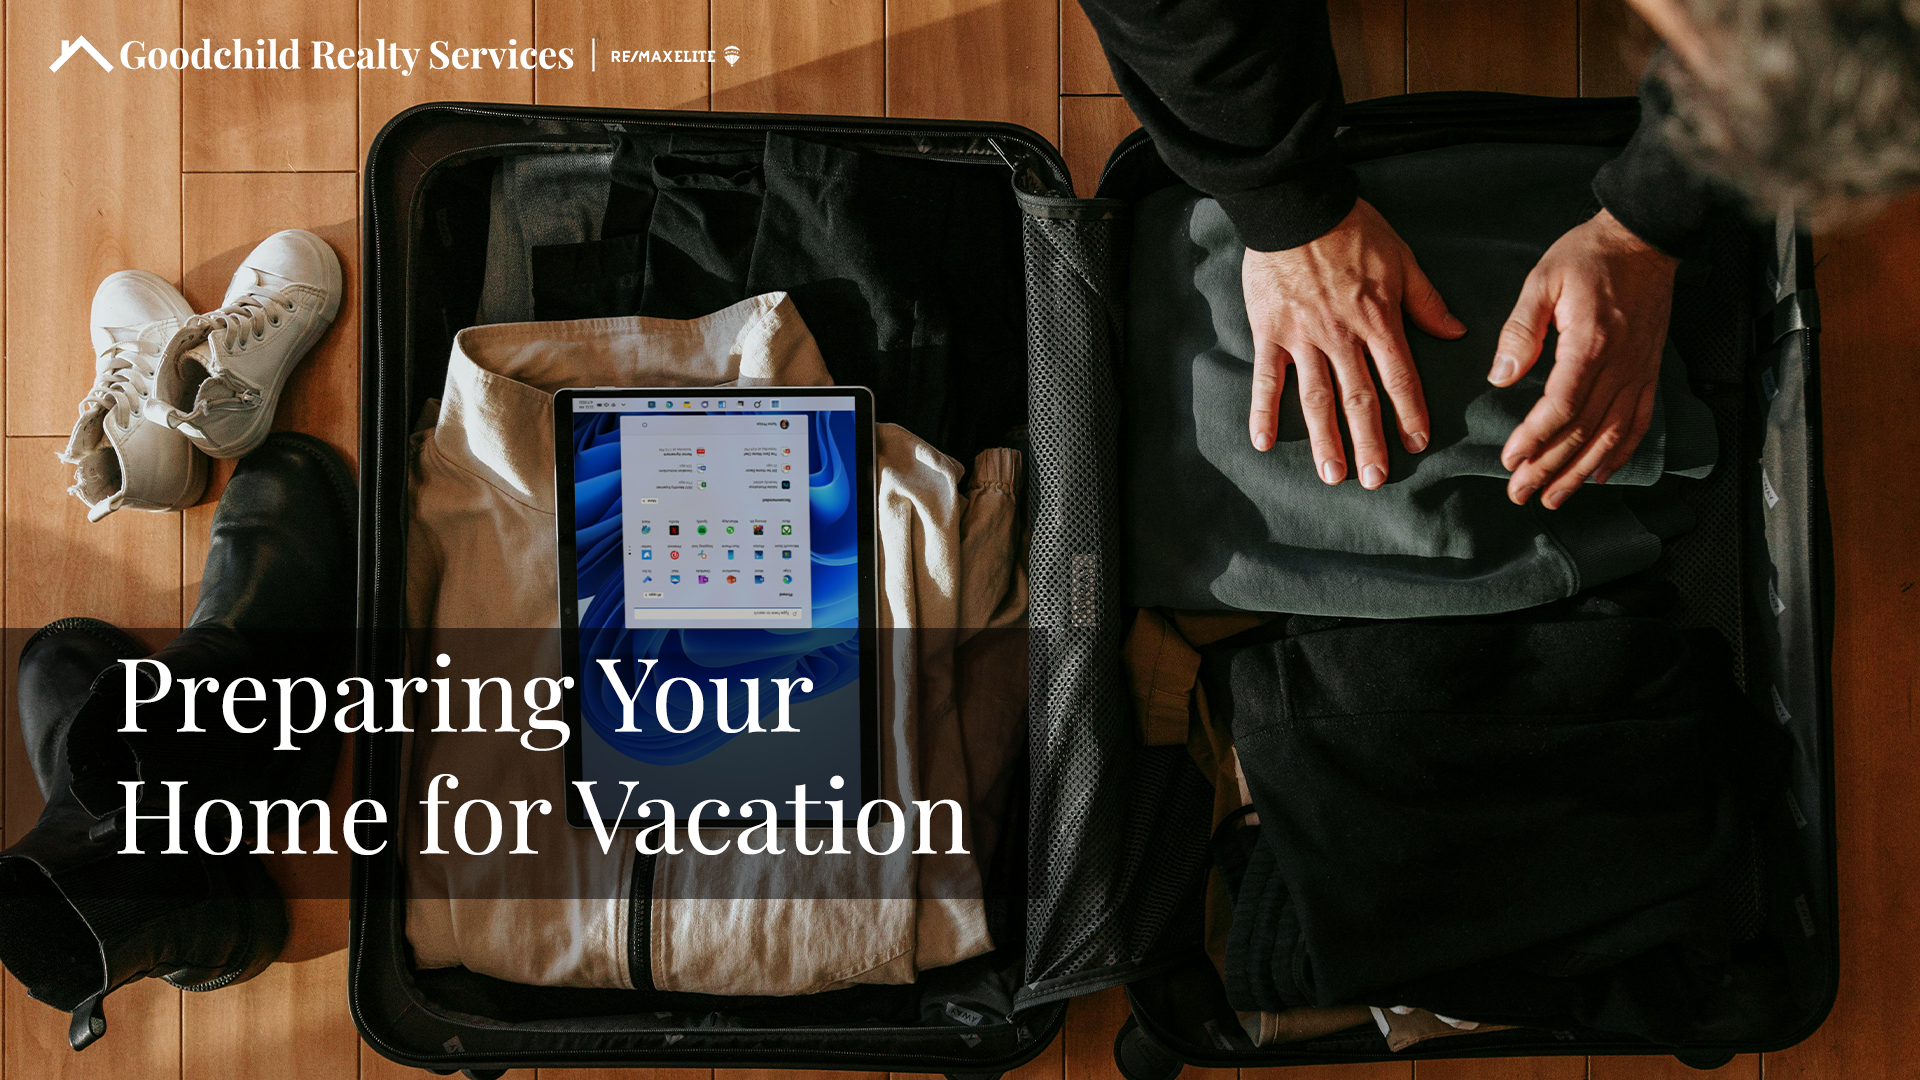 Preparing Your Home for Vacation